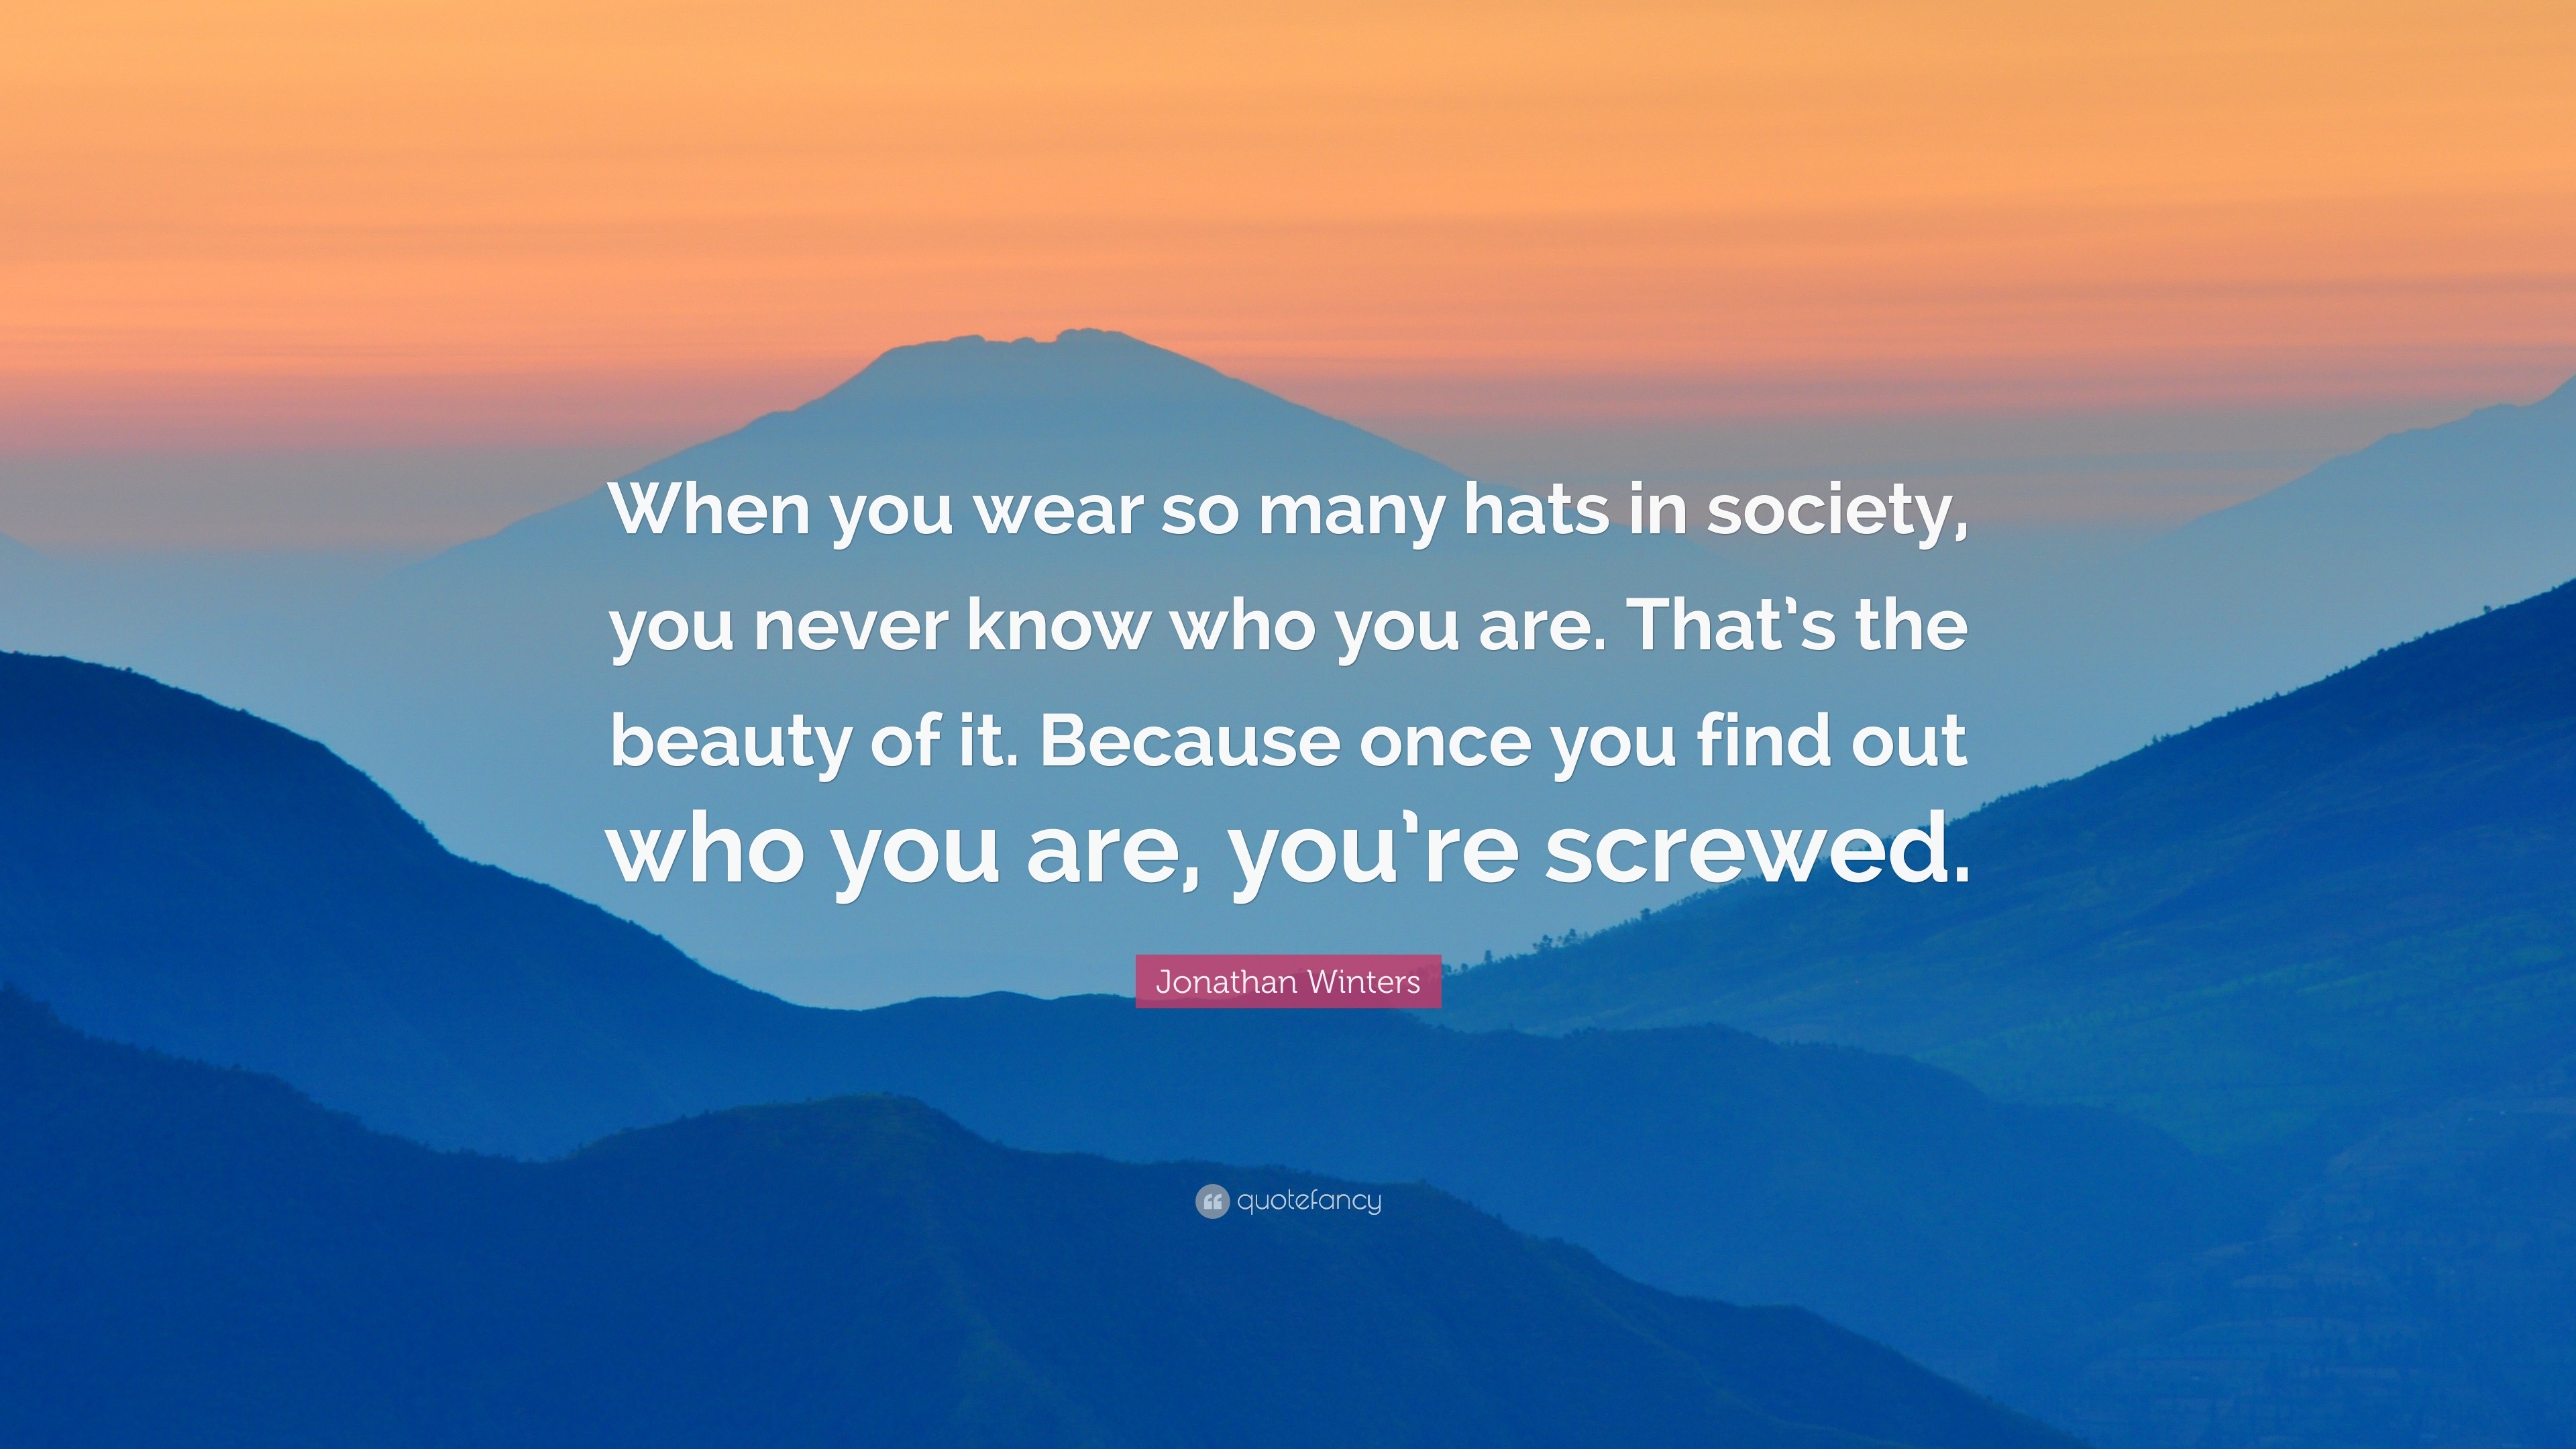 Jonathan Winters Quote: “When you wear so many hats in society, you ...